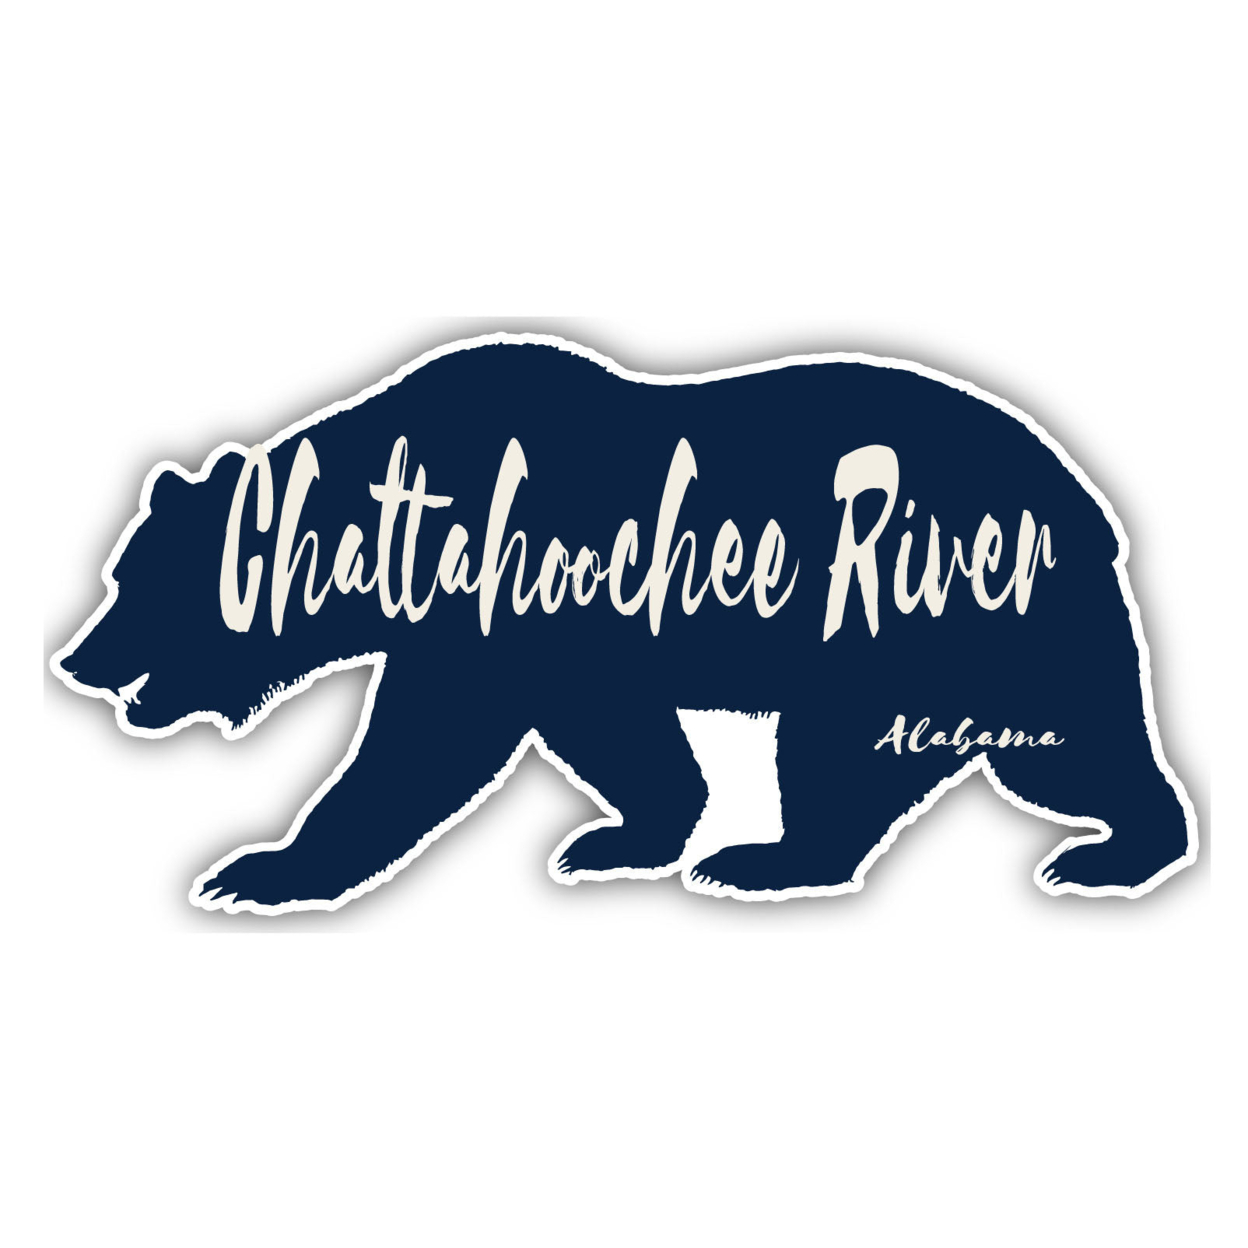 Chattahoochee River Alabama Souvenir Decorative Stickers (Choose Theme And Size) - 4-Pack, 4-Inch, Bear